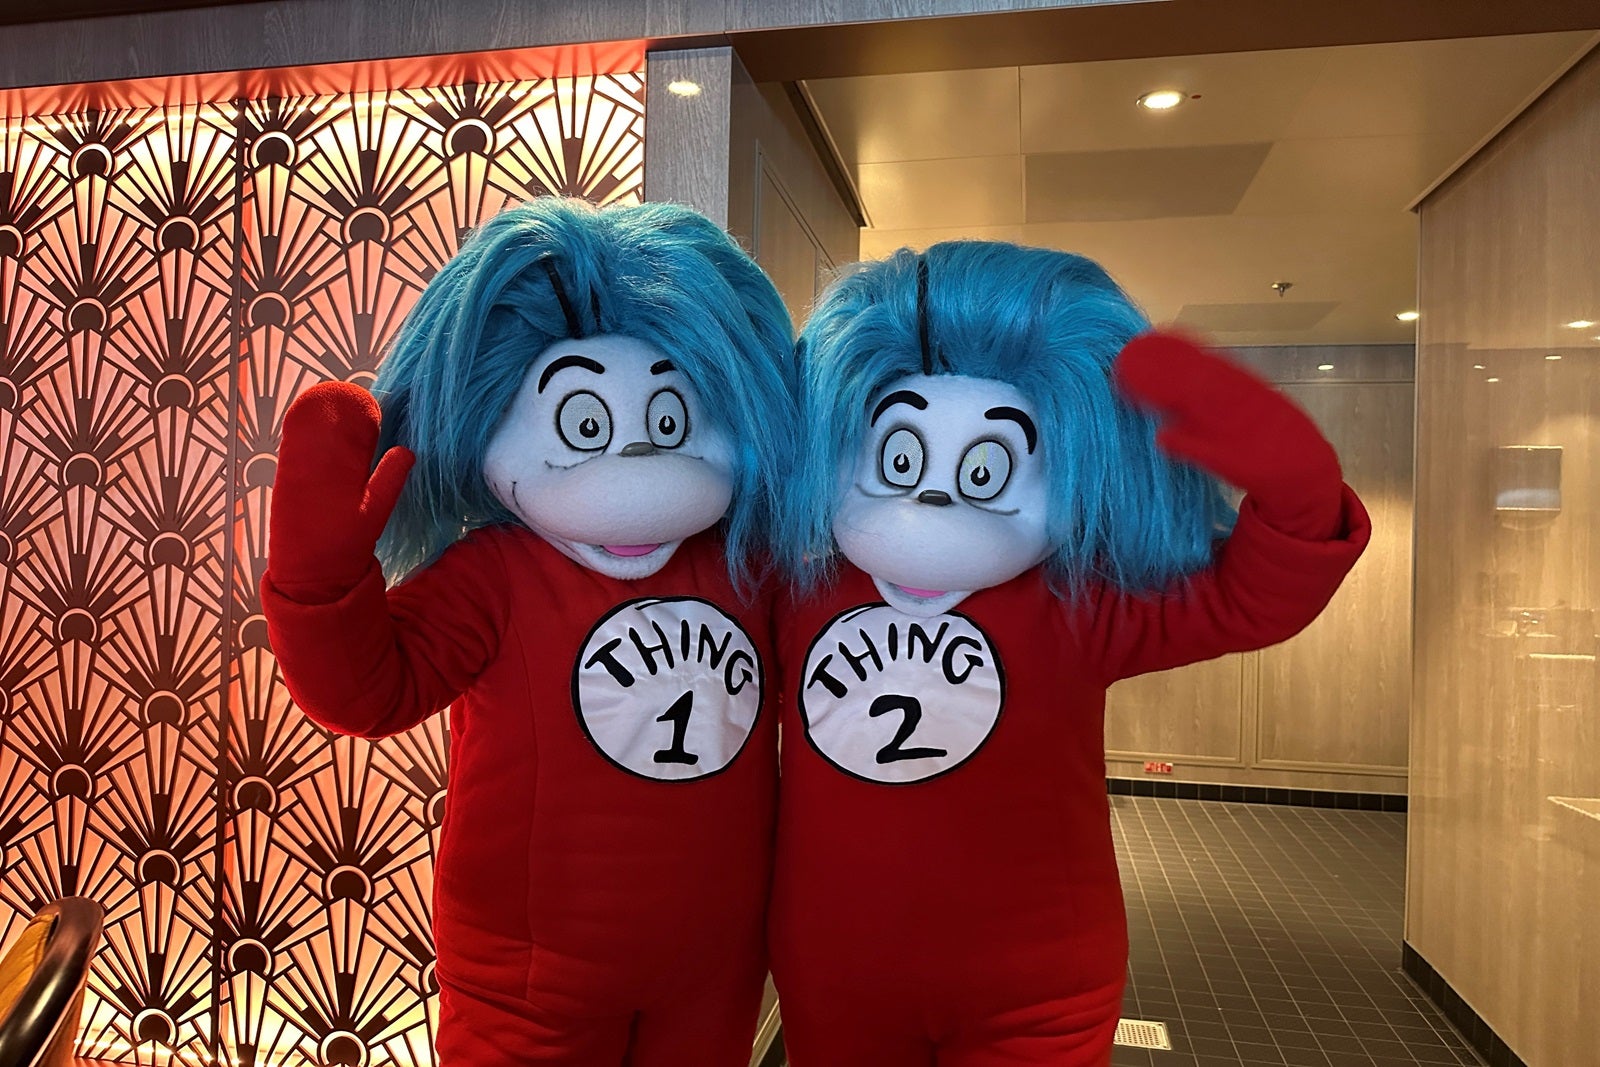 Dr. Seuss characters Thing 1 and Thing 2 pose for a photo